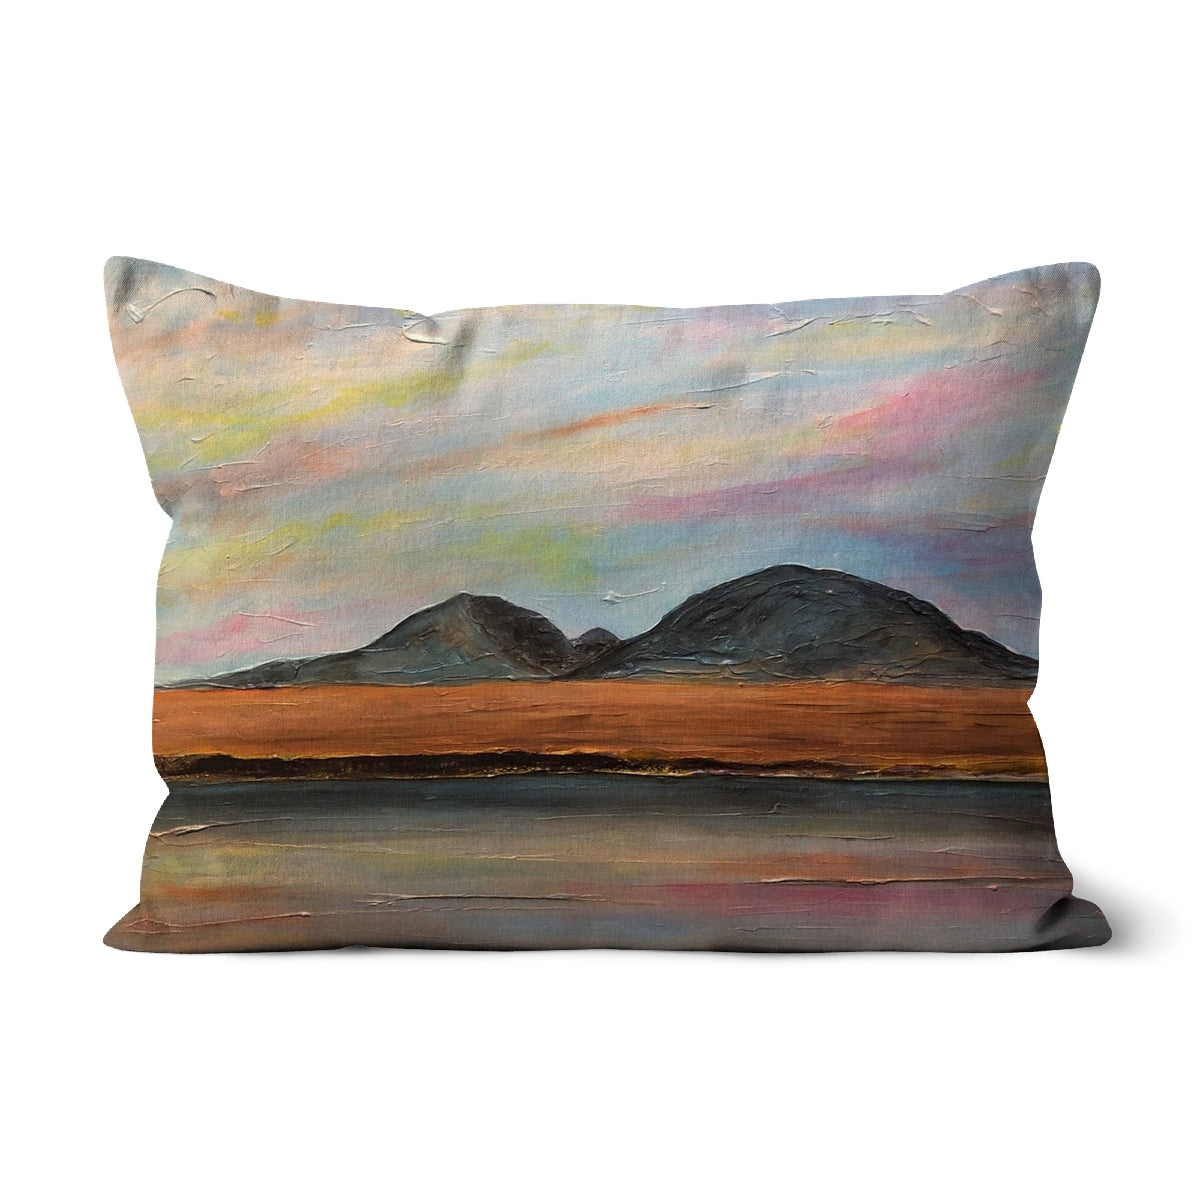 Jura Dawn Art Gifts Cushion-Cushions-Hebridean Islands Art Gallery-Faux Suede-19"x13"-Paintings, Prints, Homeware, Art Gifts From Scotland By Scottish Artist Kevin Hunter